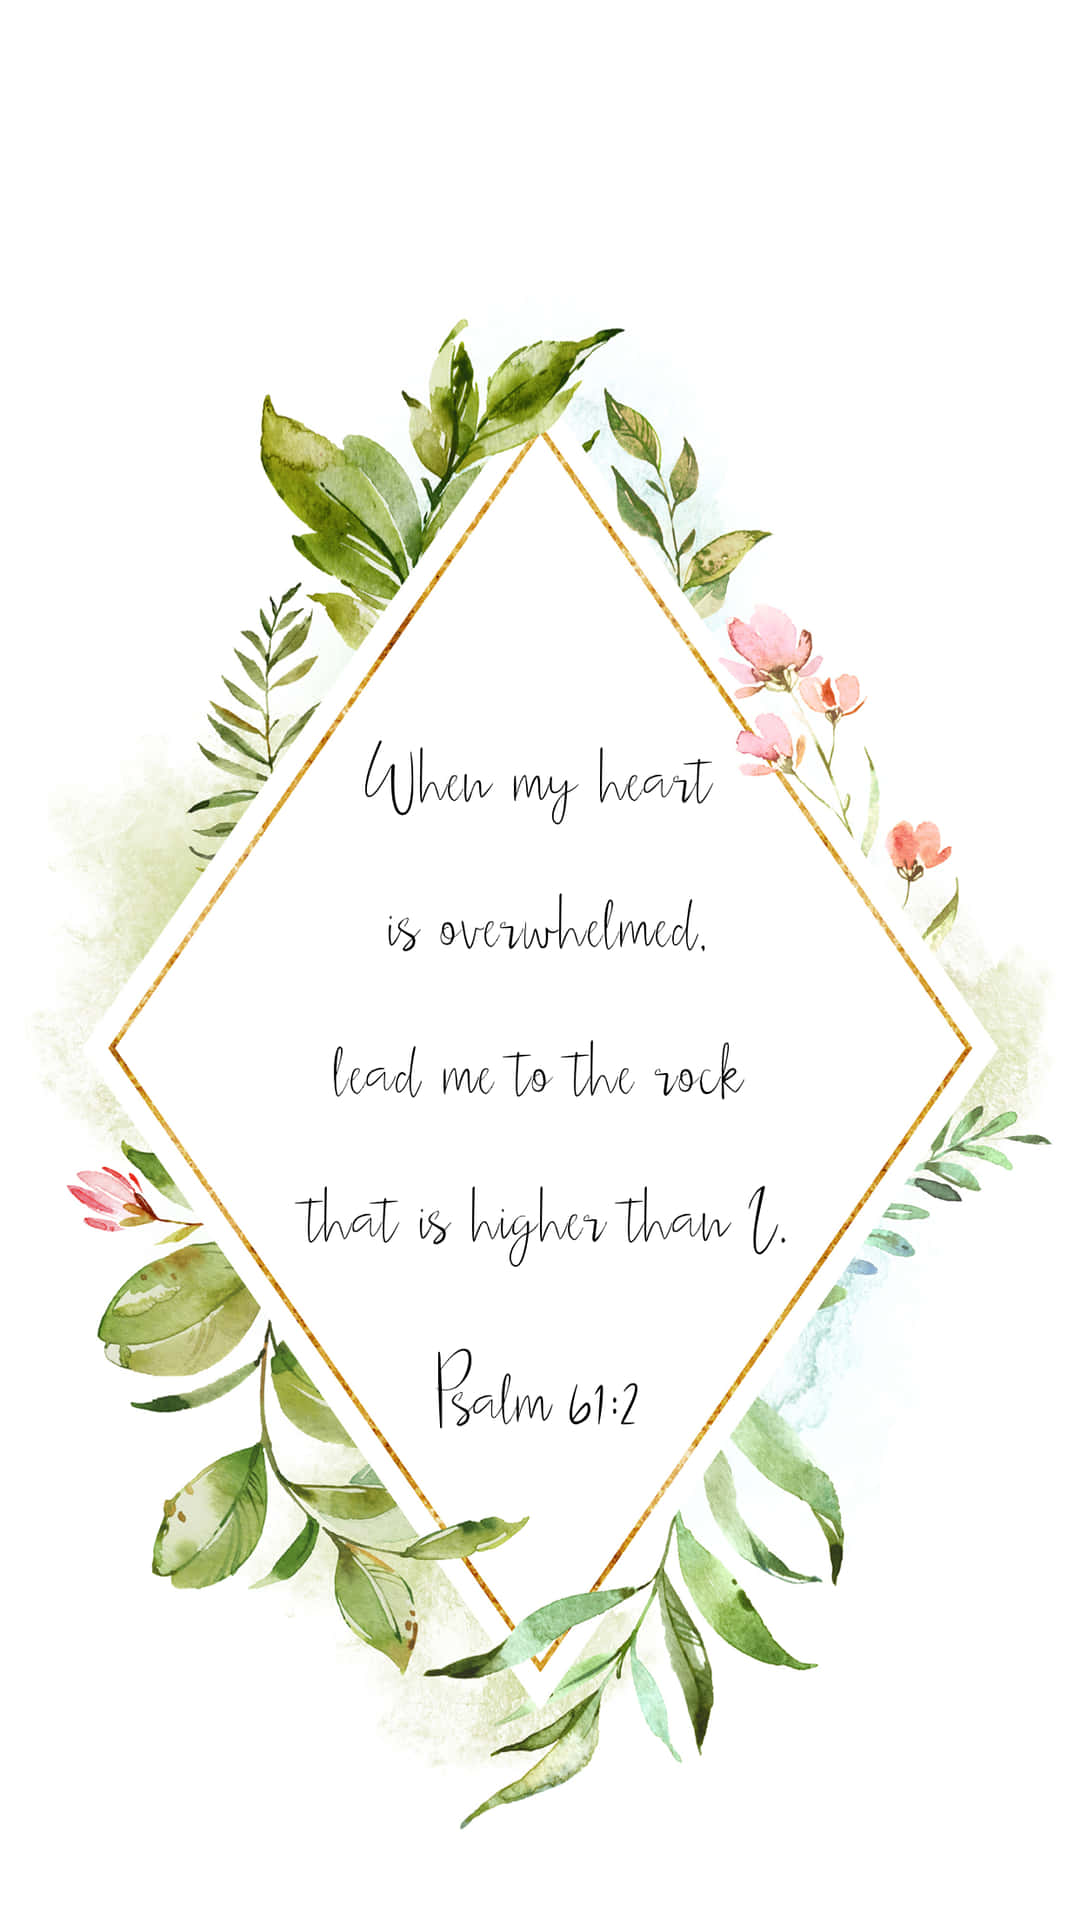 "Trust in the Lord with all your heart and lean not on your own understanding." Proverbs 3:5 Wallpaper